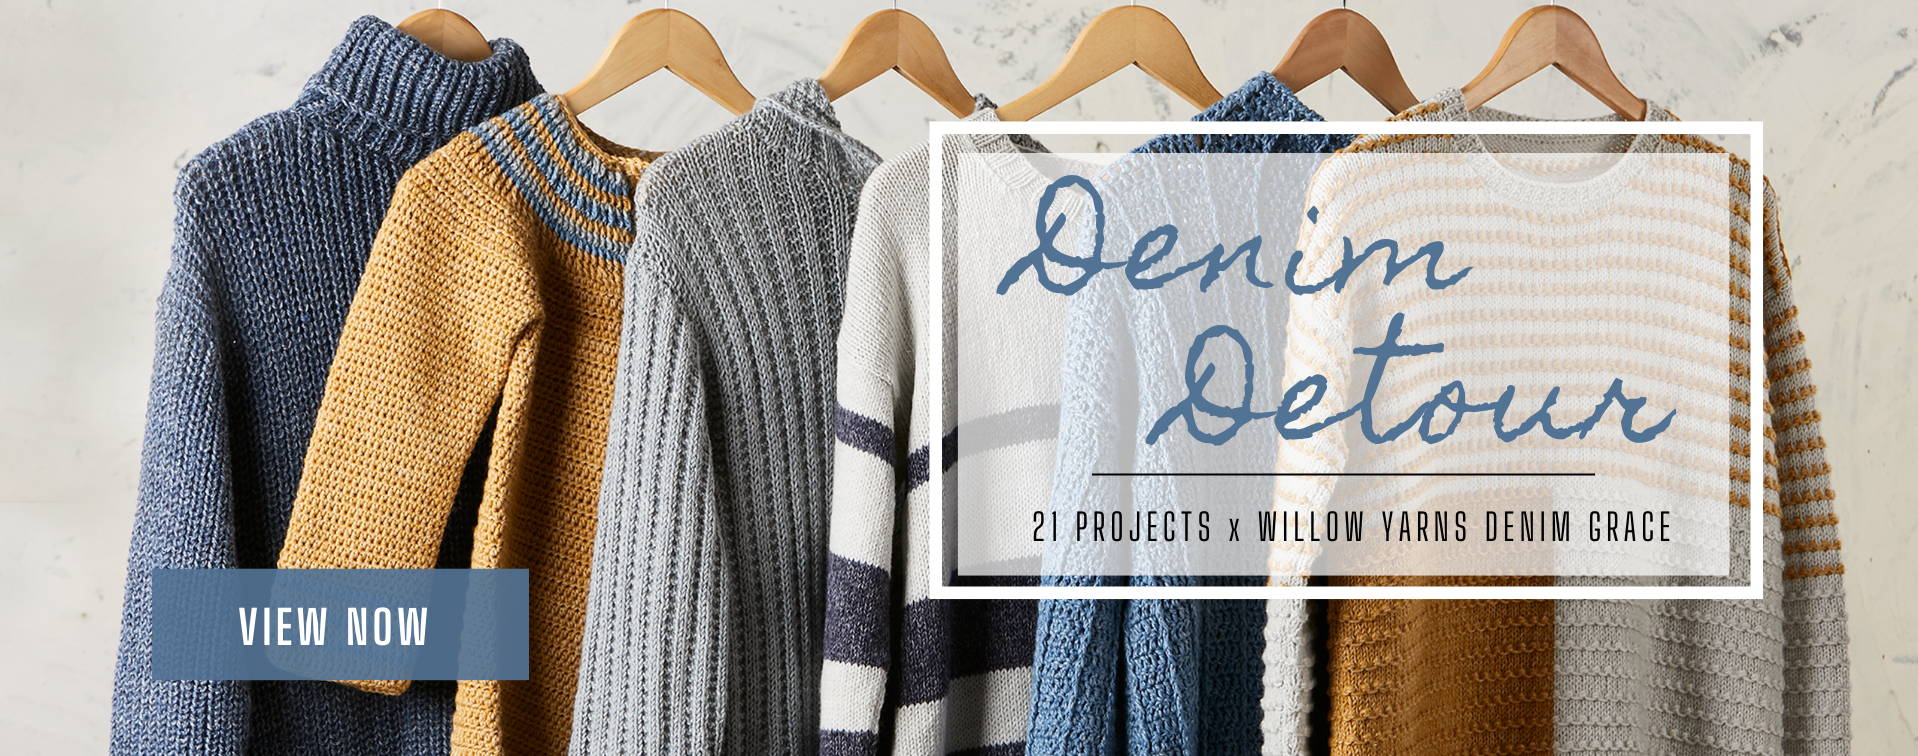 Denim Detour 21 Projects with Willow Yarns Denim Grace